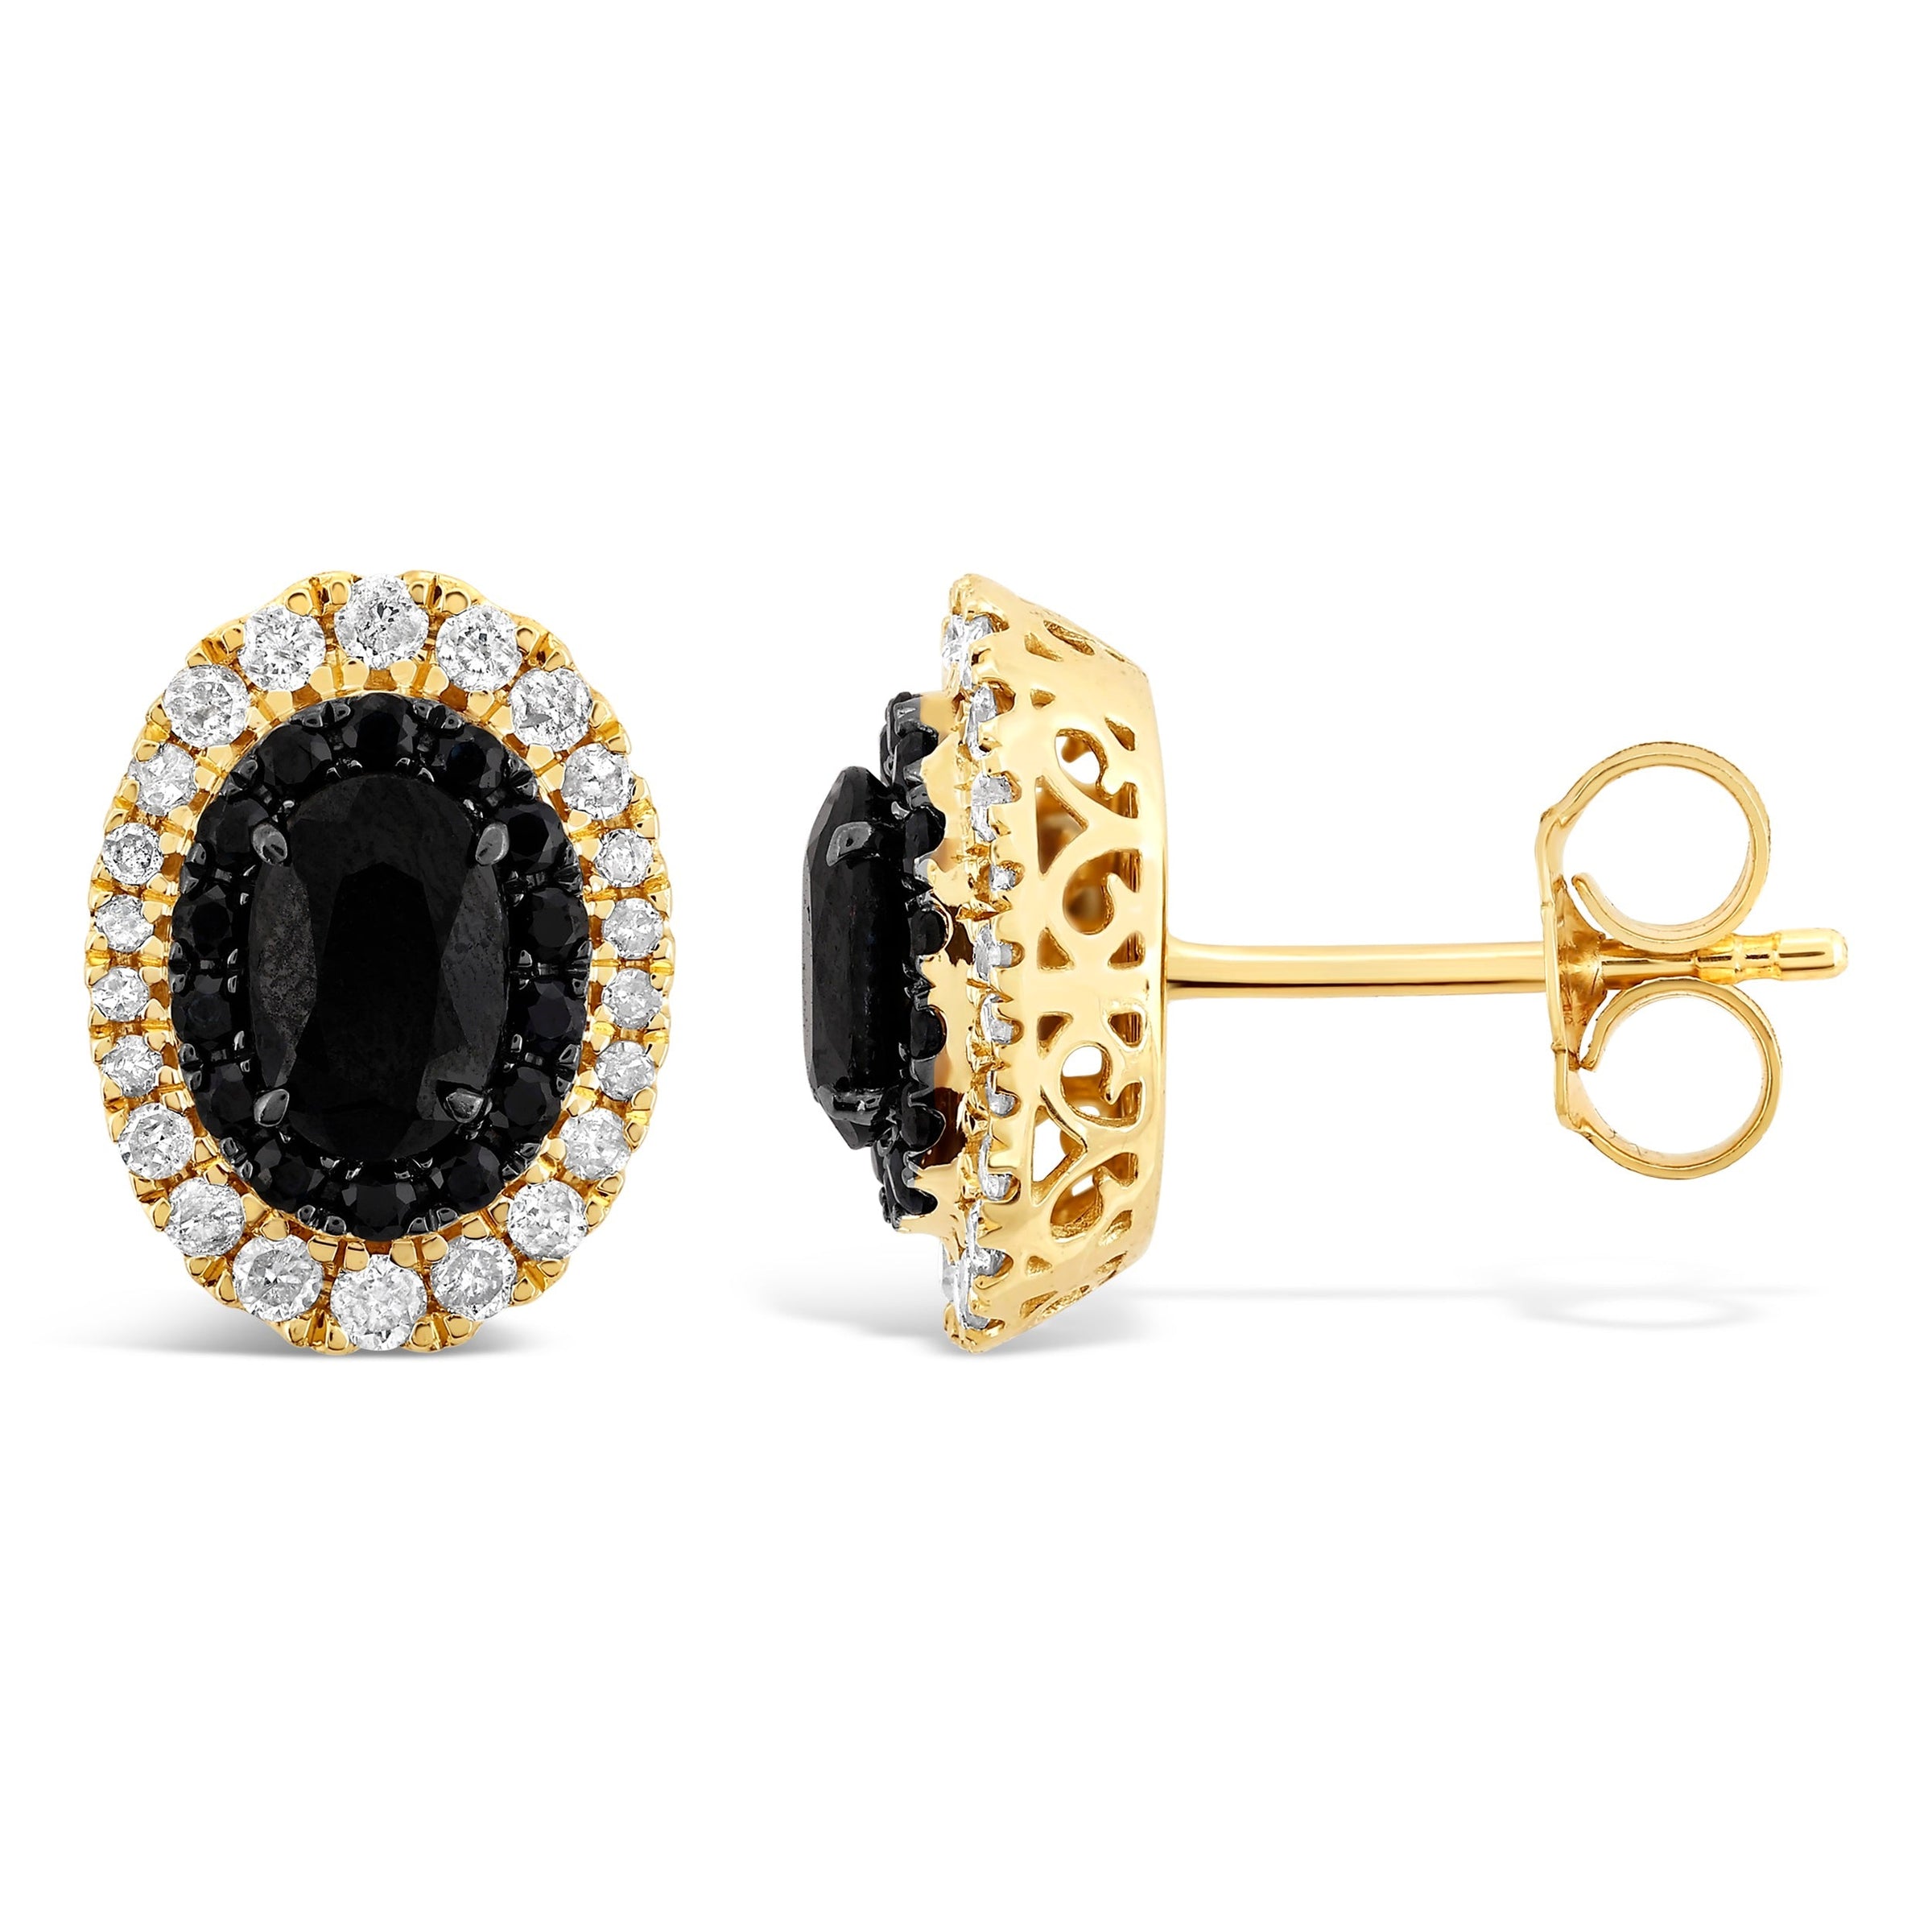 Oval Sapphire Stud Earrings with 1/3ct of Diamonds in 9ct Yellow Gold Earrings Bevilles 